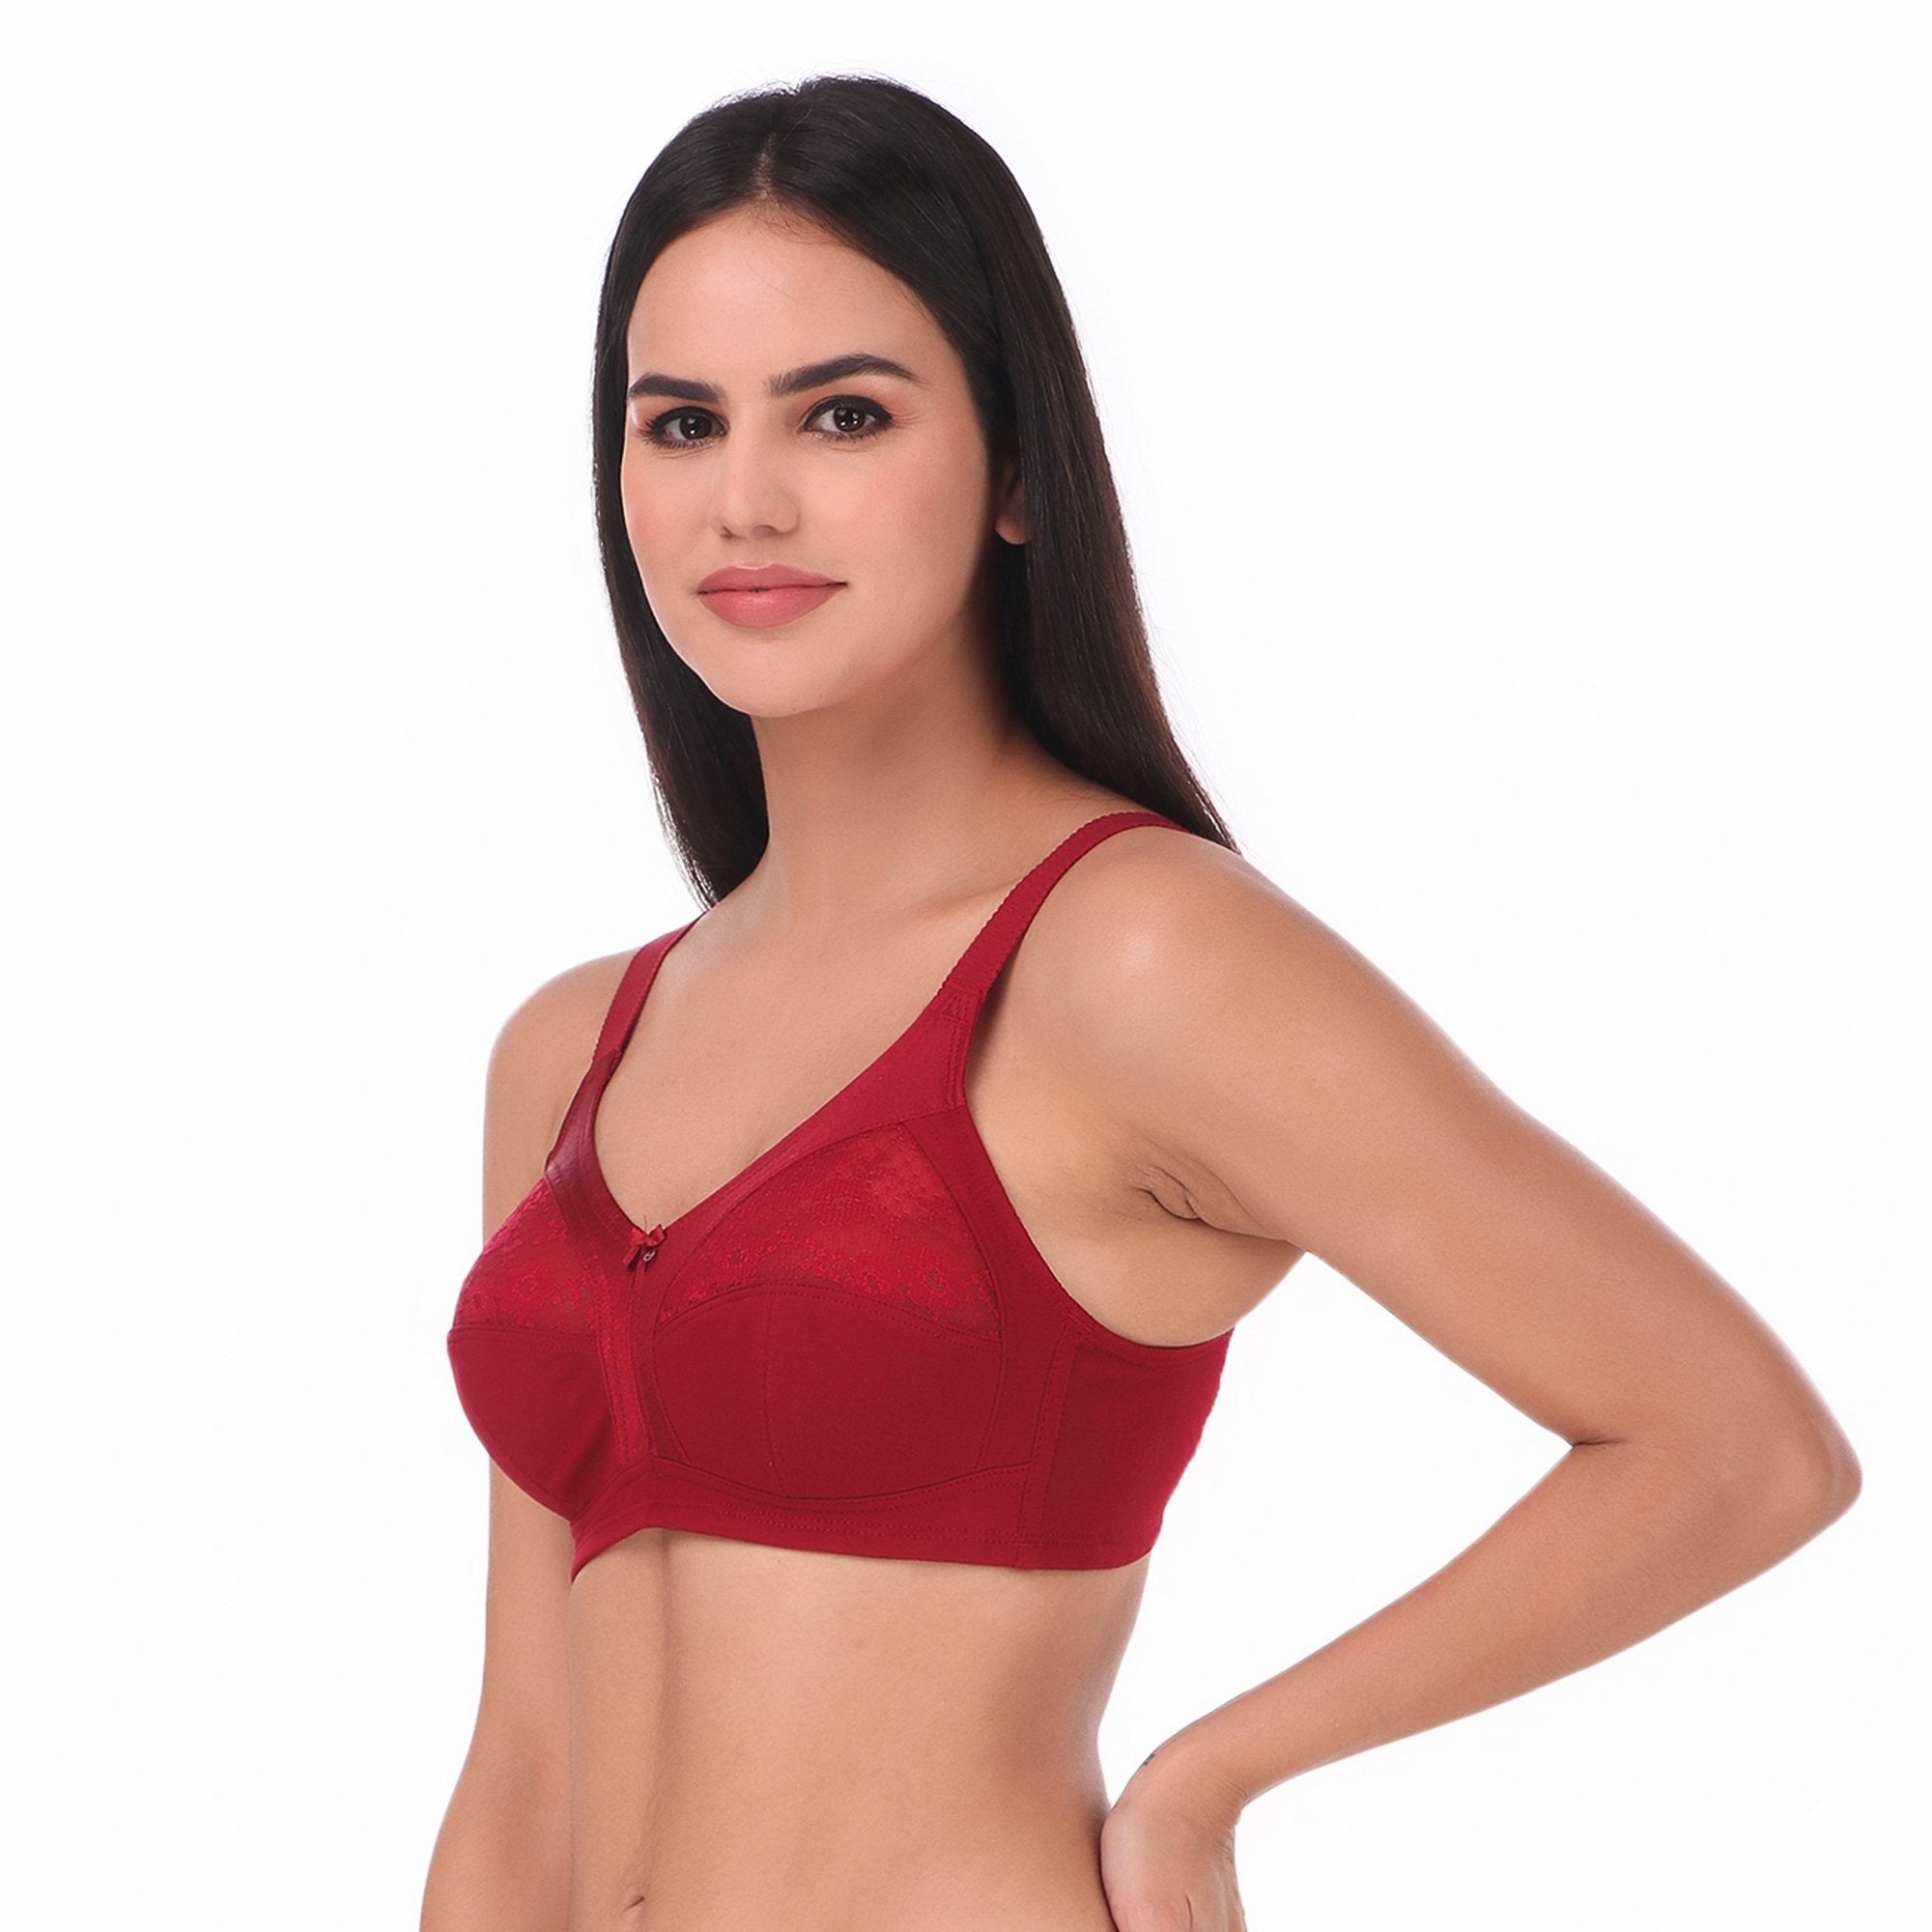 ENAMOR-A014 M-Frame Contouring Full Support Bra - Supima Cotton Non-Padded Wirefree 34 C / SKIN